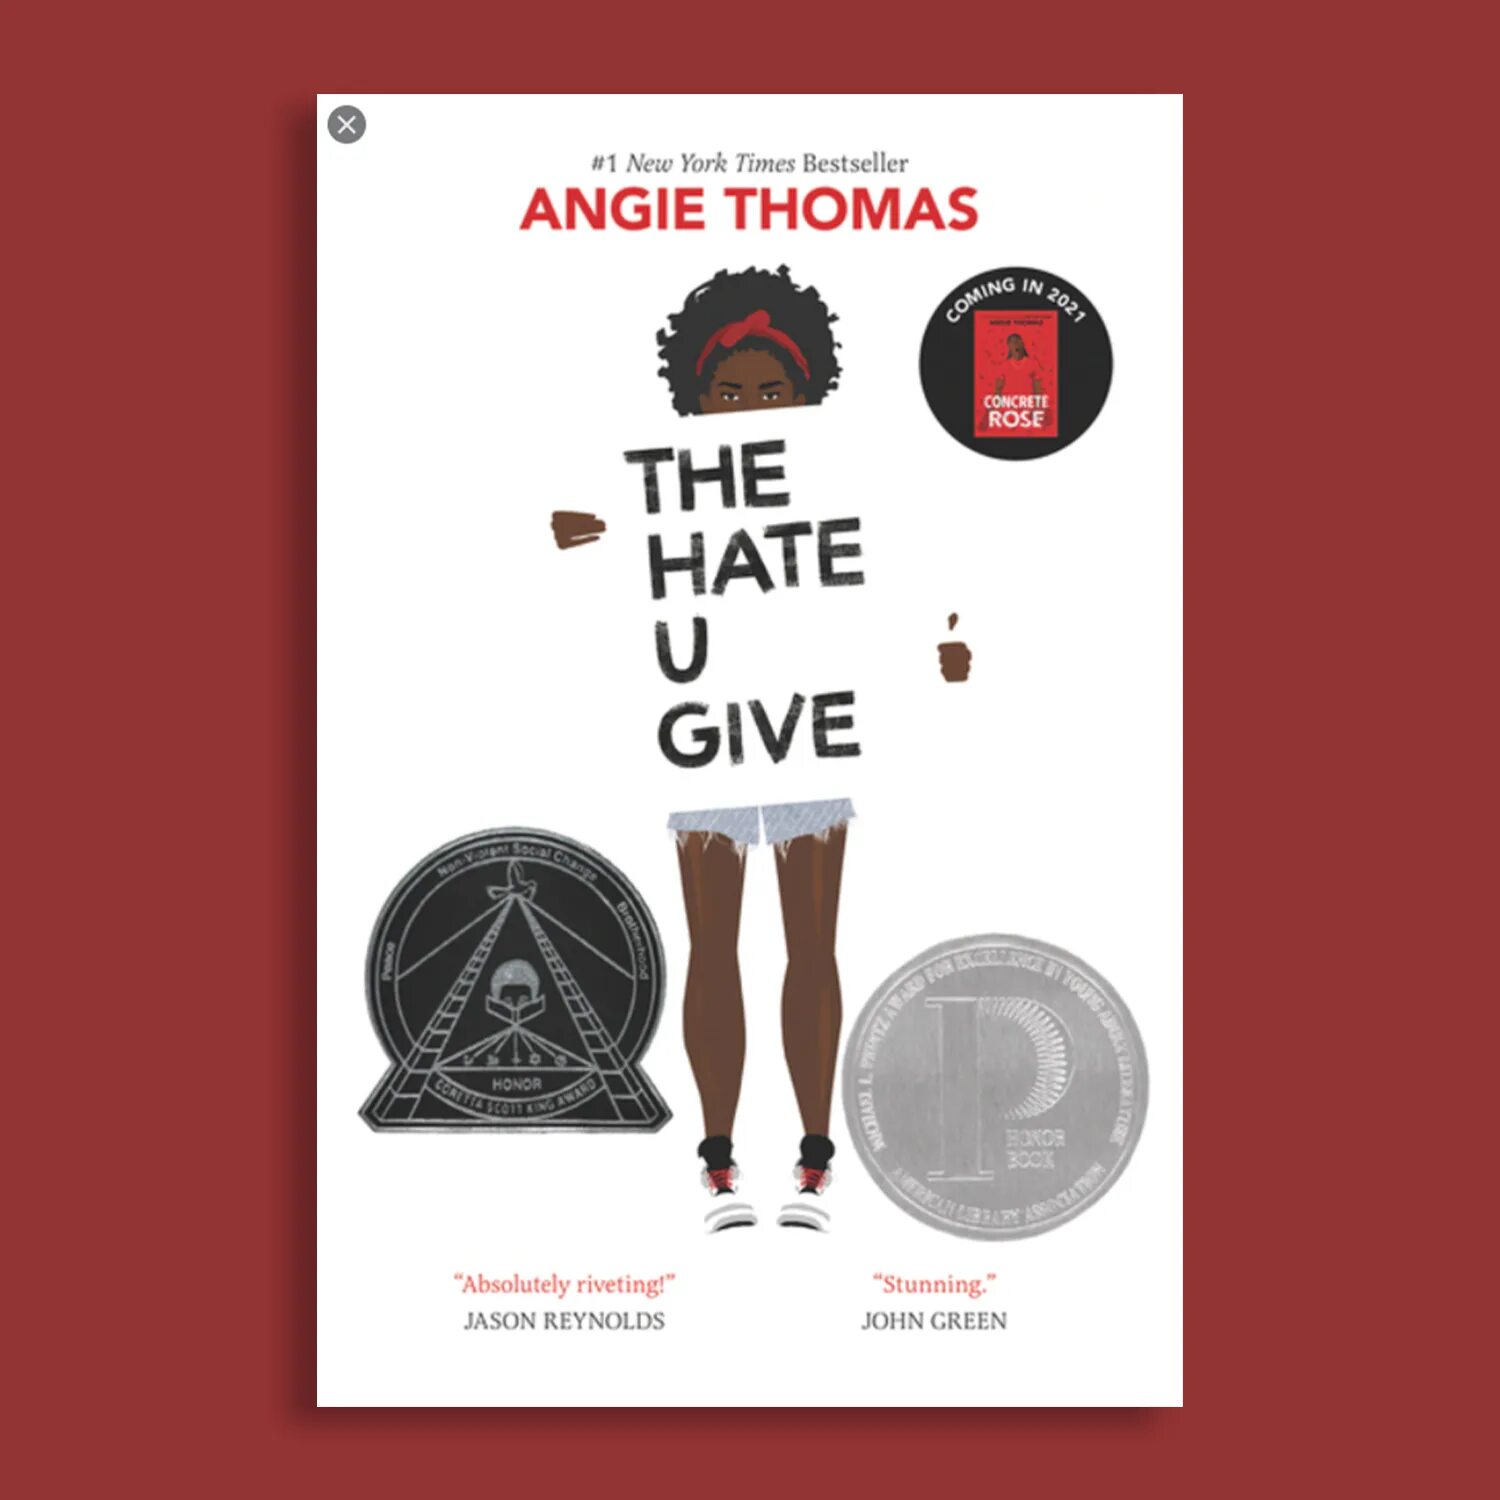 1 give him this book. The hate u give. The hate you give book. Лонг the hate. I hate u игра.